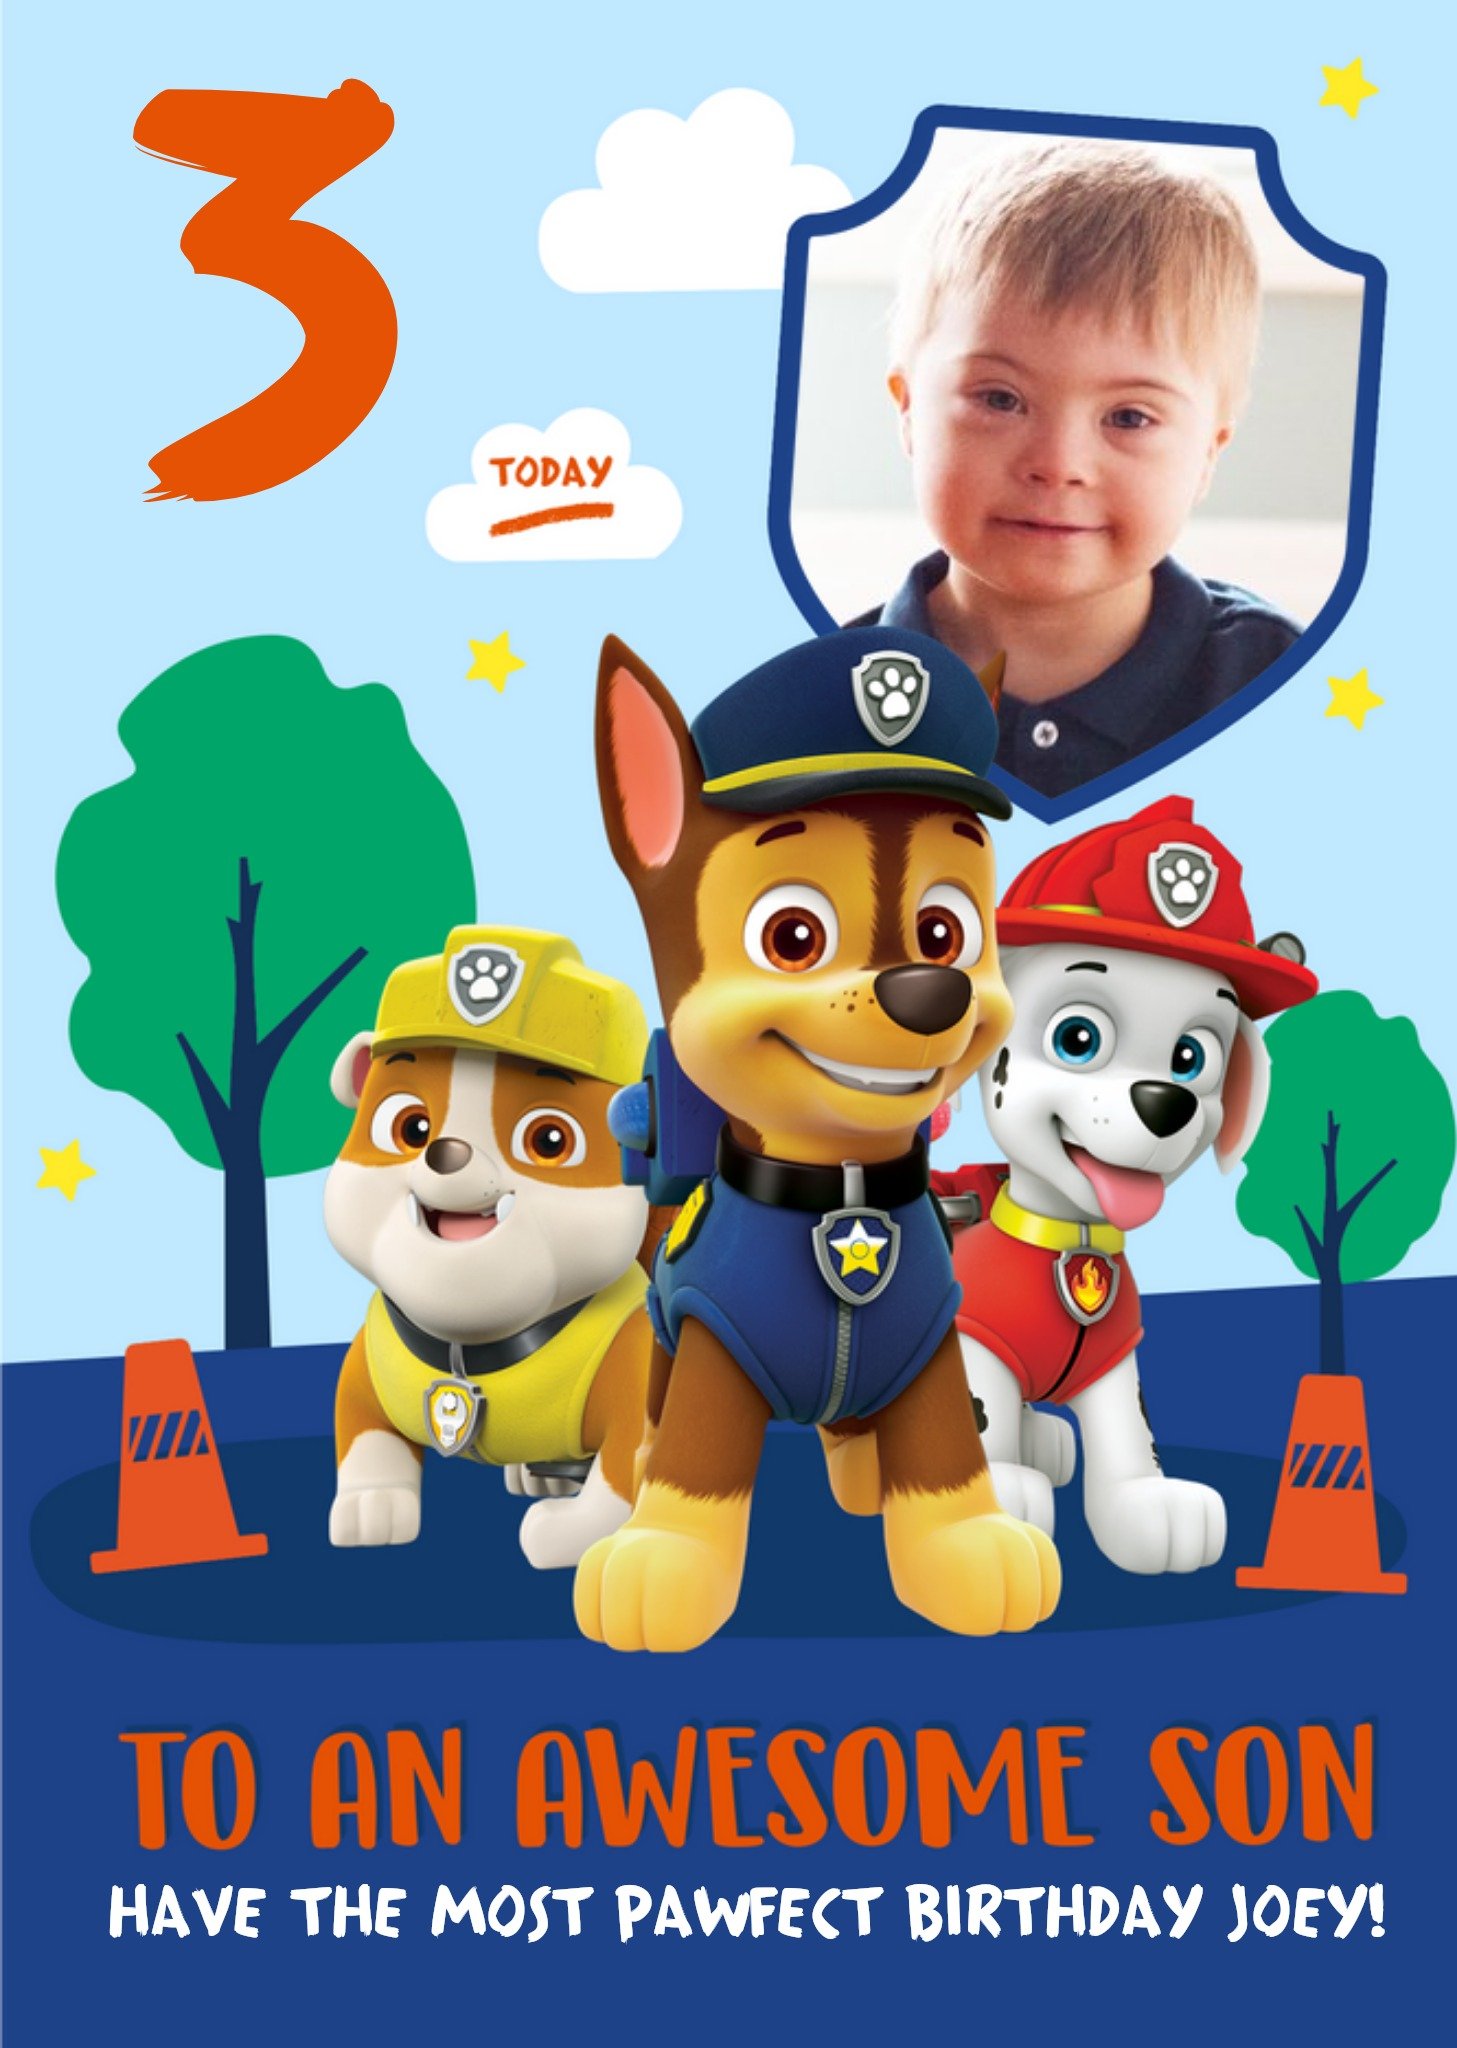 Paw Patrol Birthday Card For Son An Awesome Son, Large